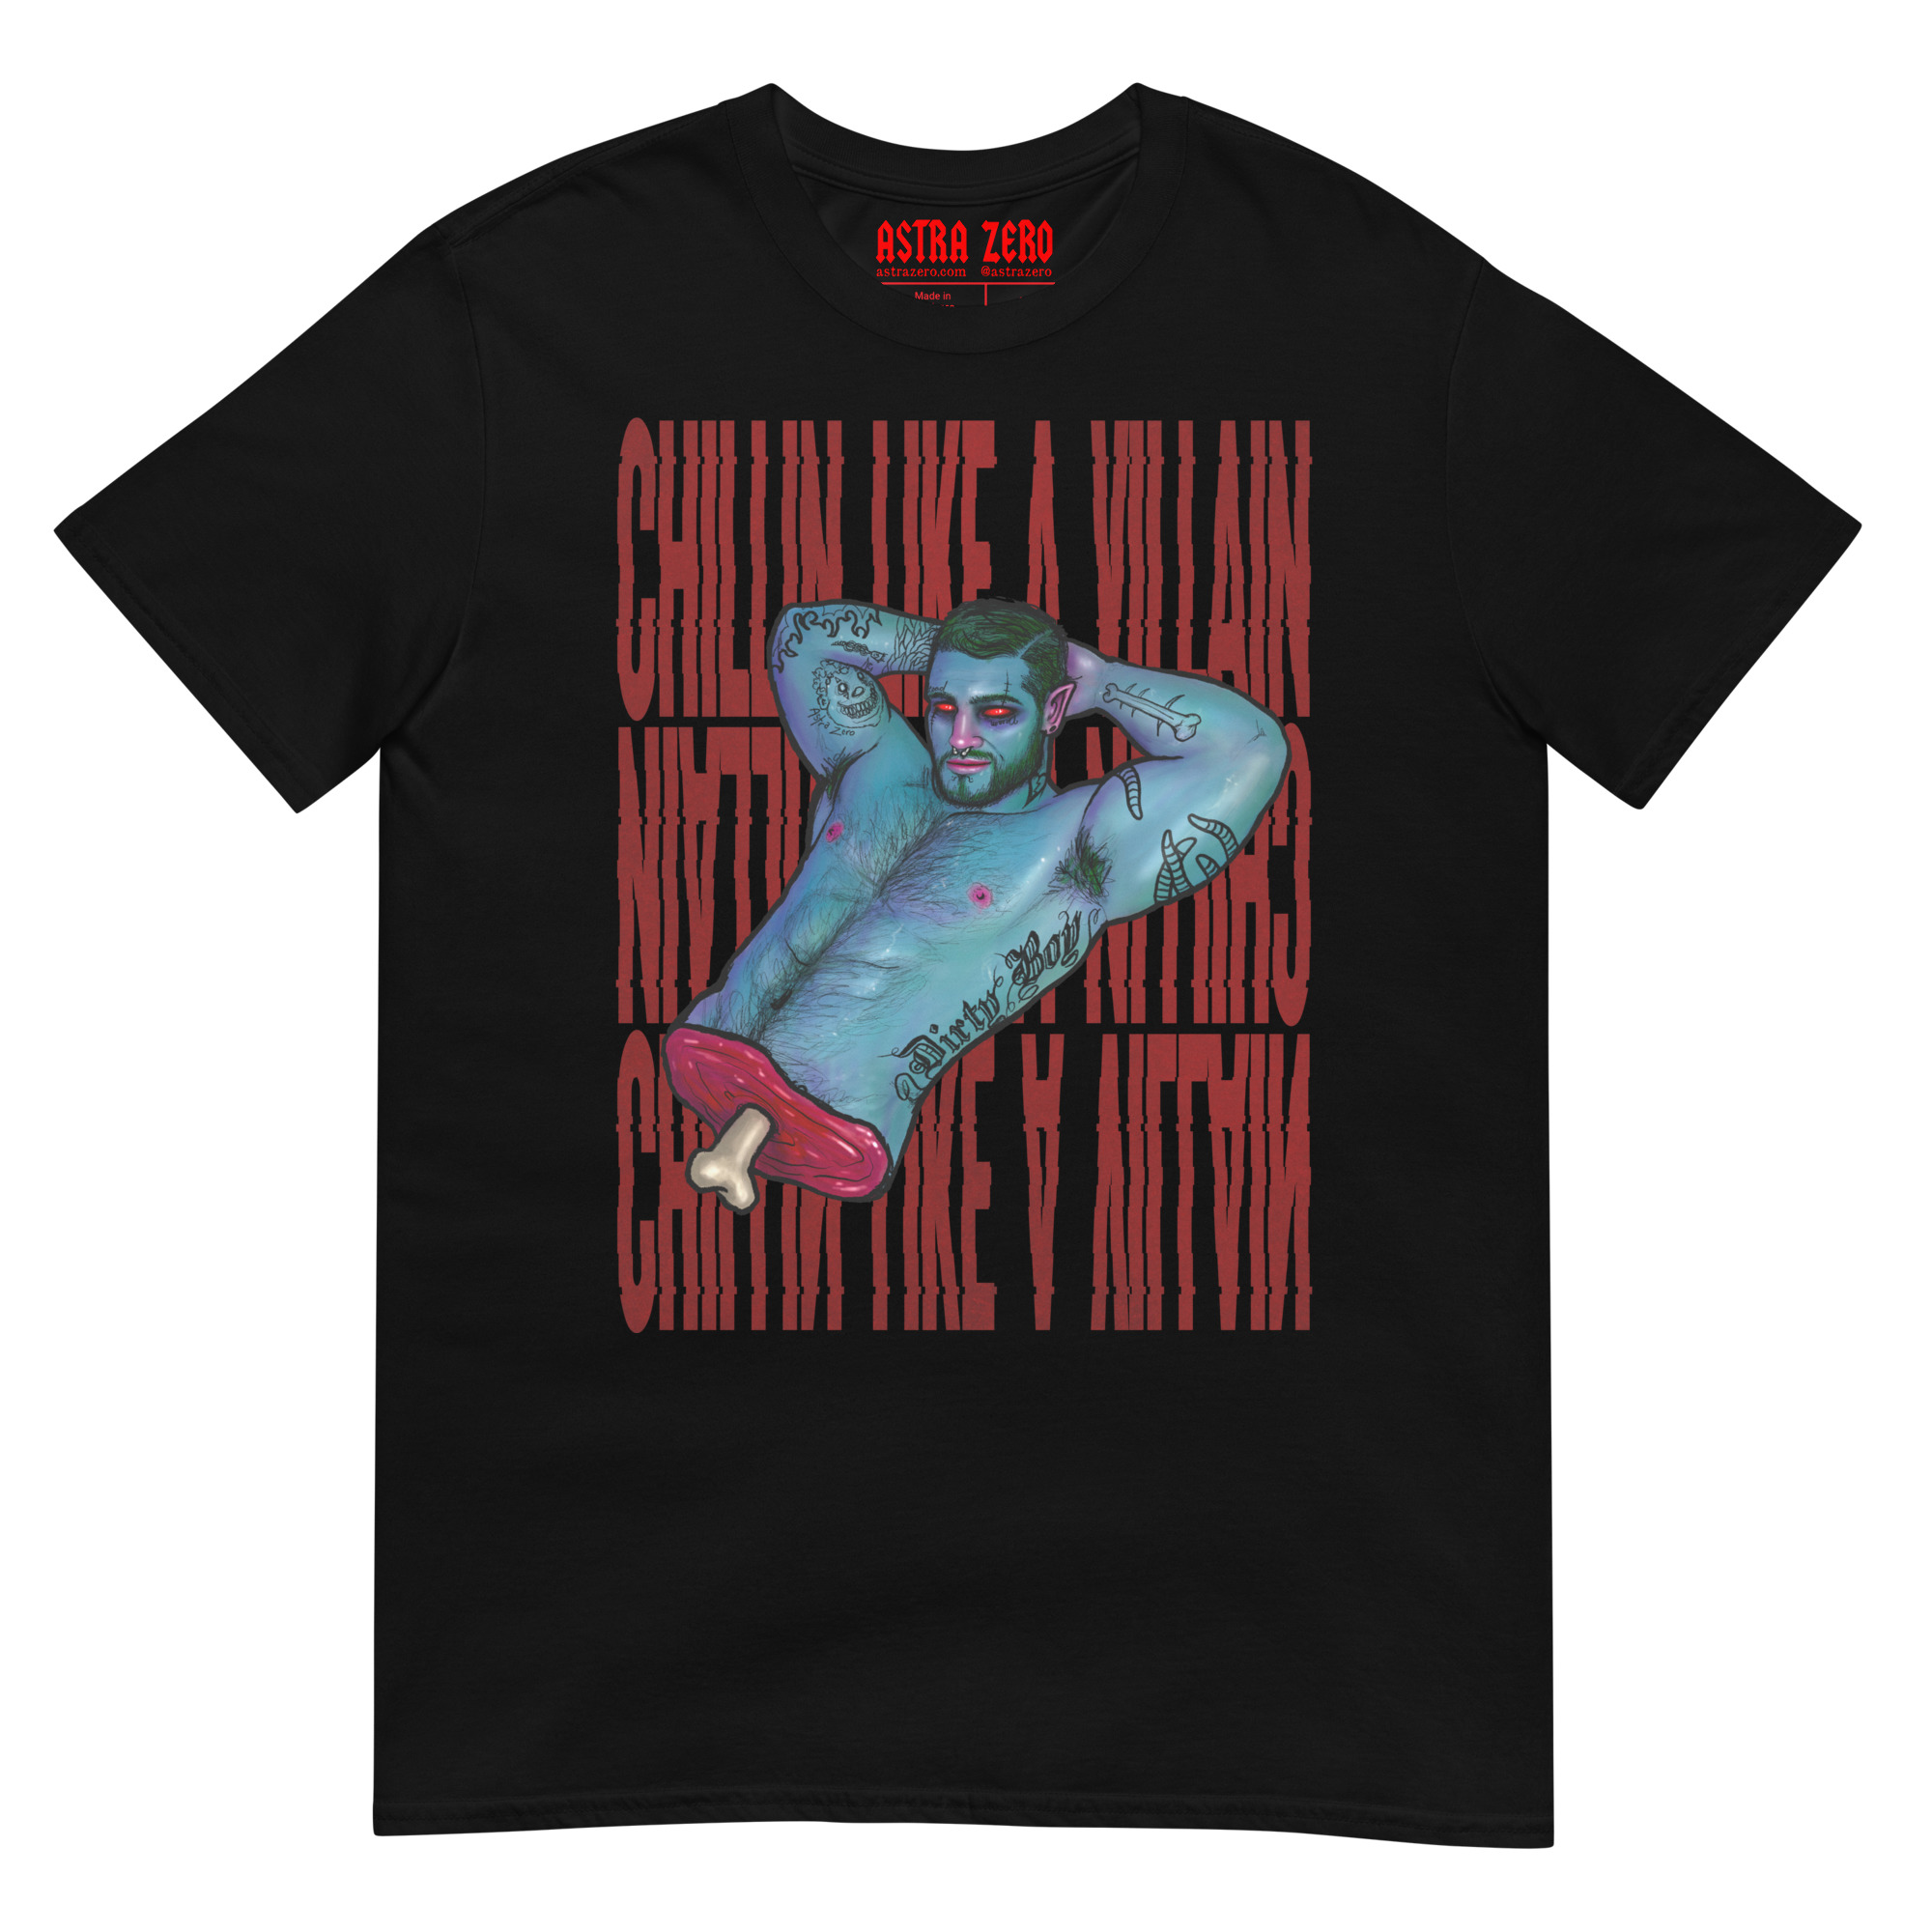 Featured image for “Chillin like a Villain - Short-Sleeve Unisex T-Shirt”